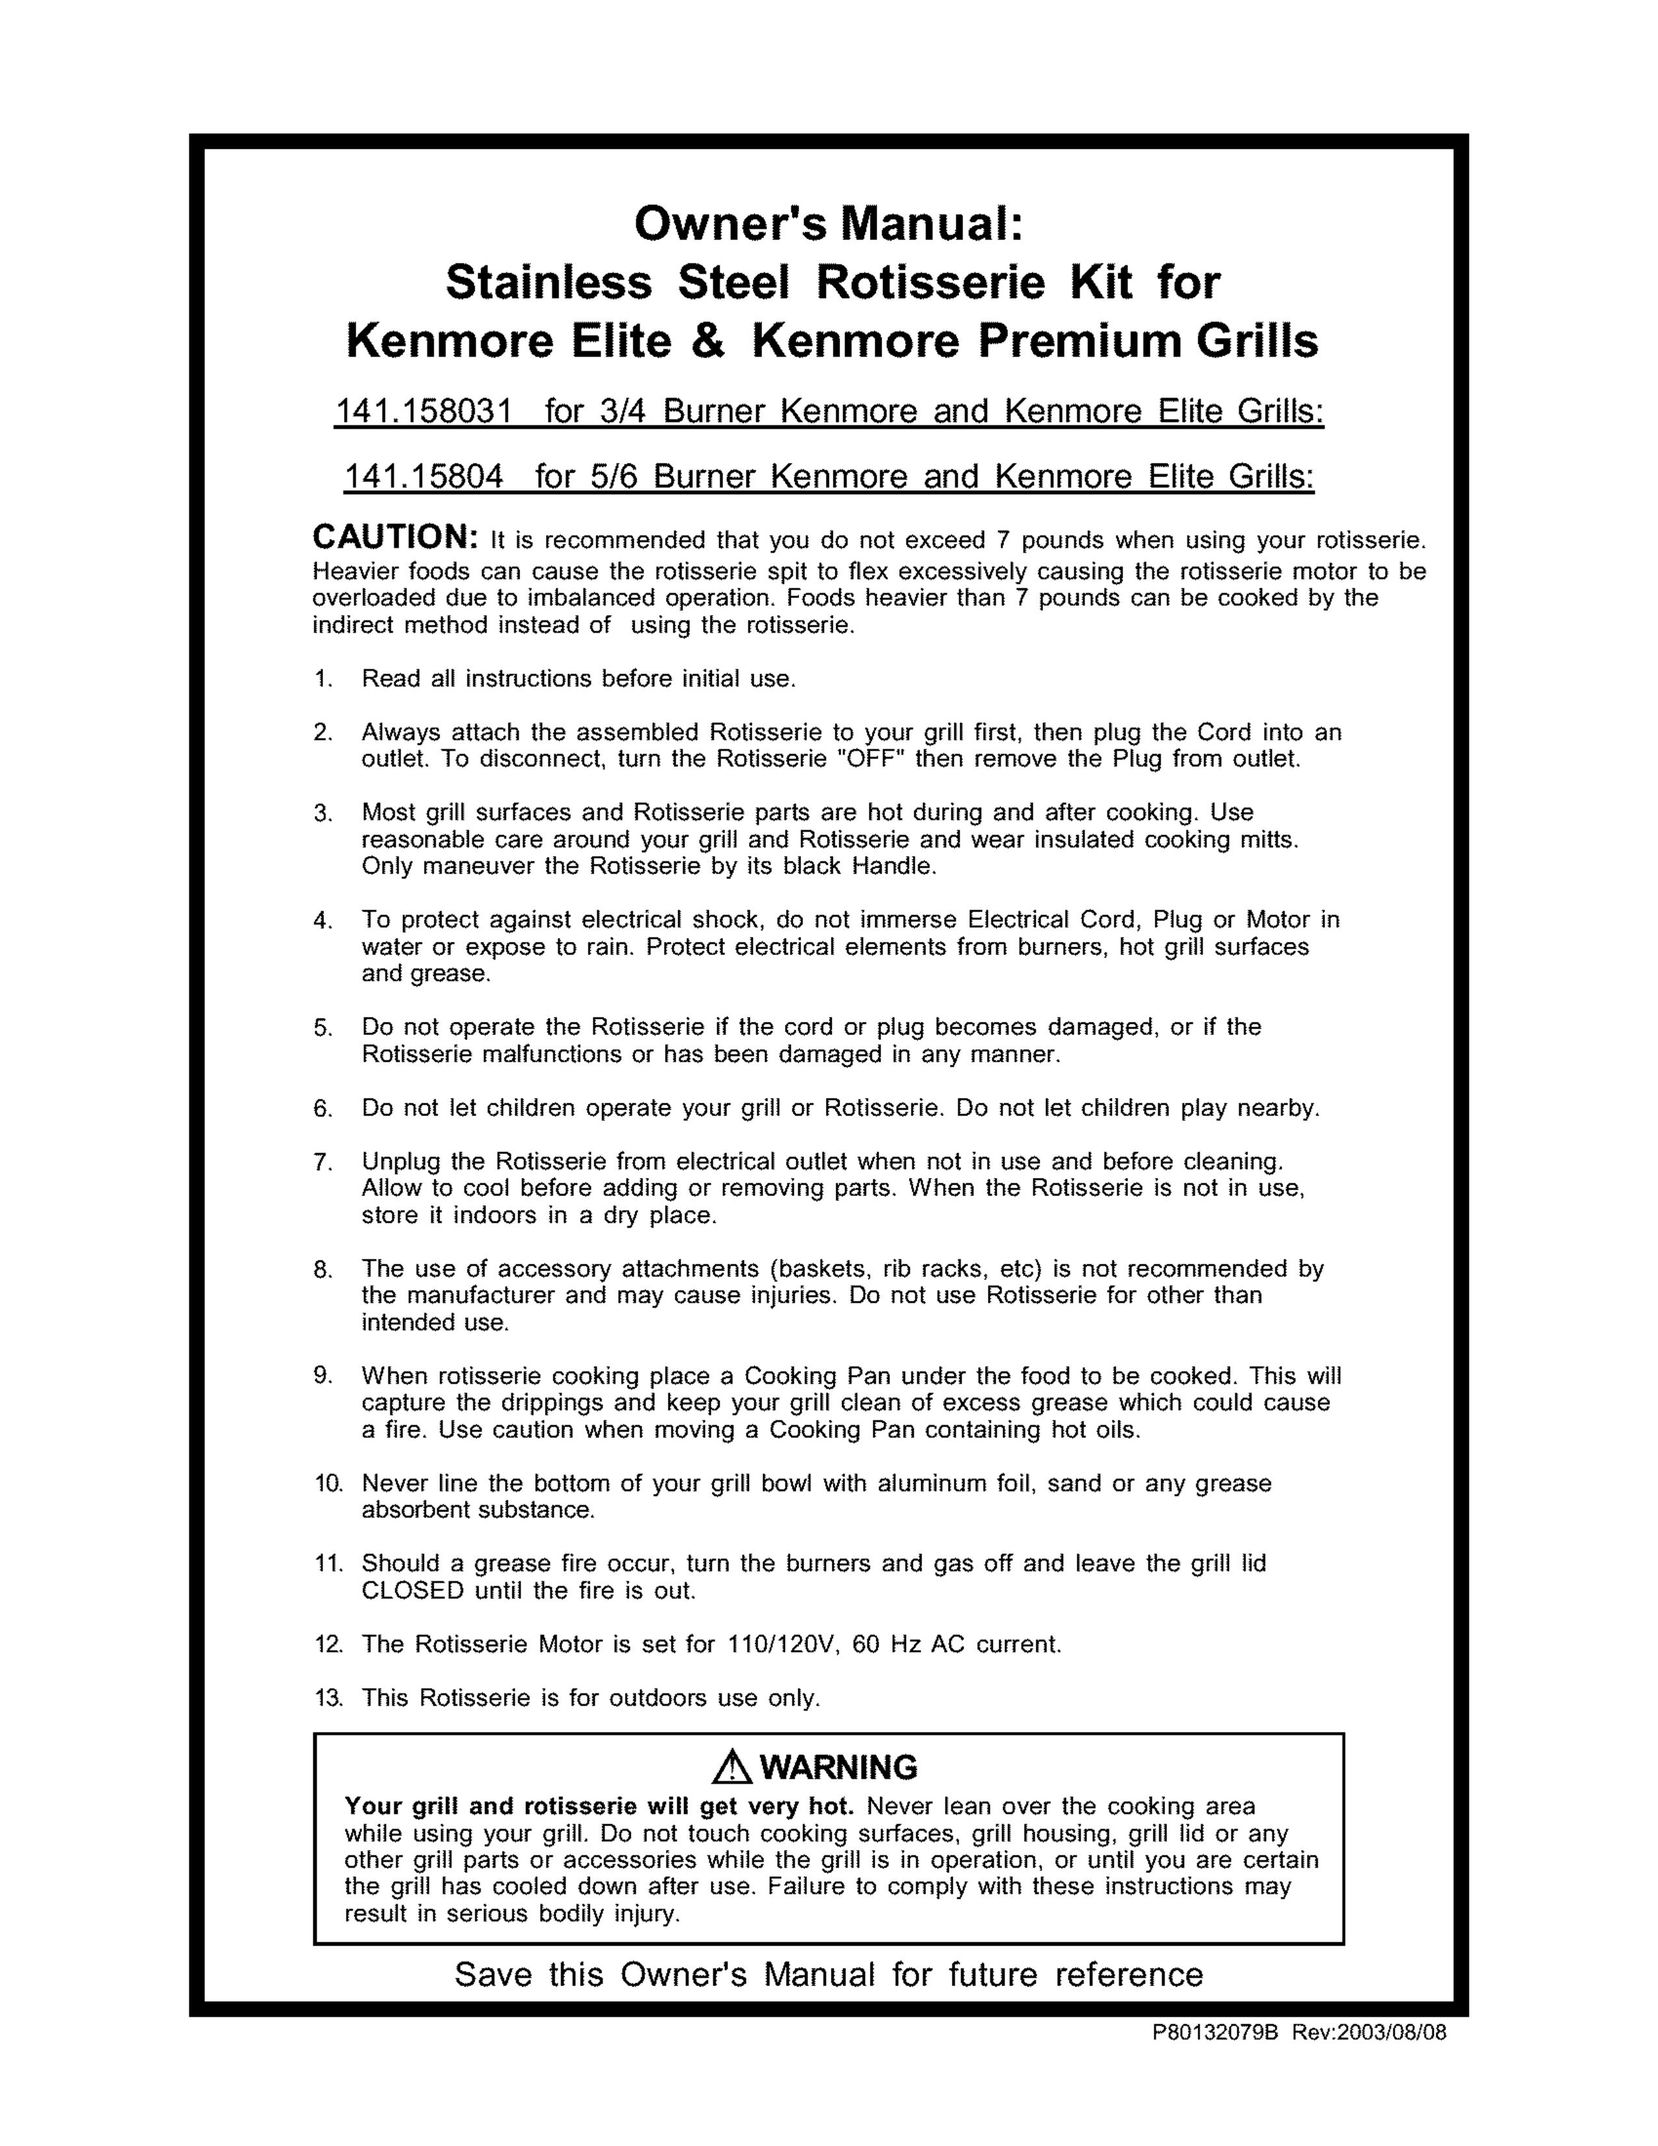 Kenmore 141.158031 Convection Oven User Manual (Page 1)